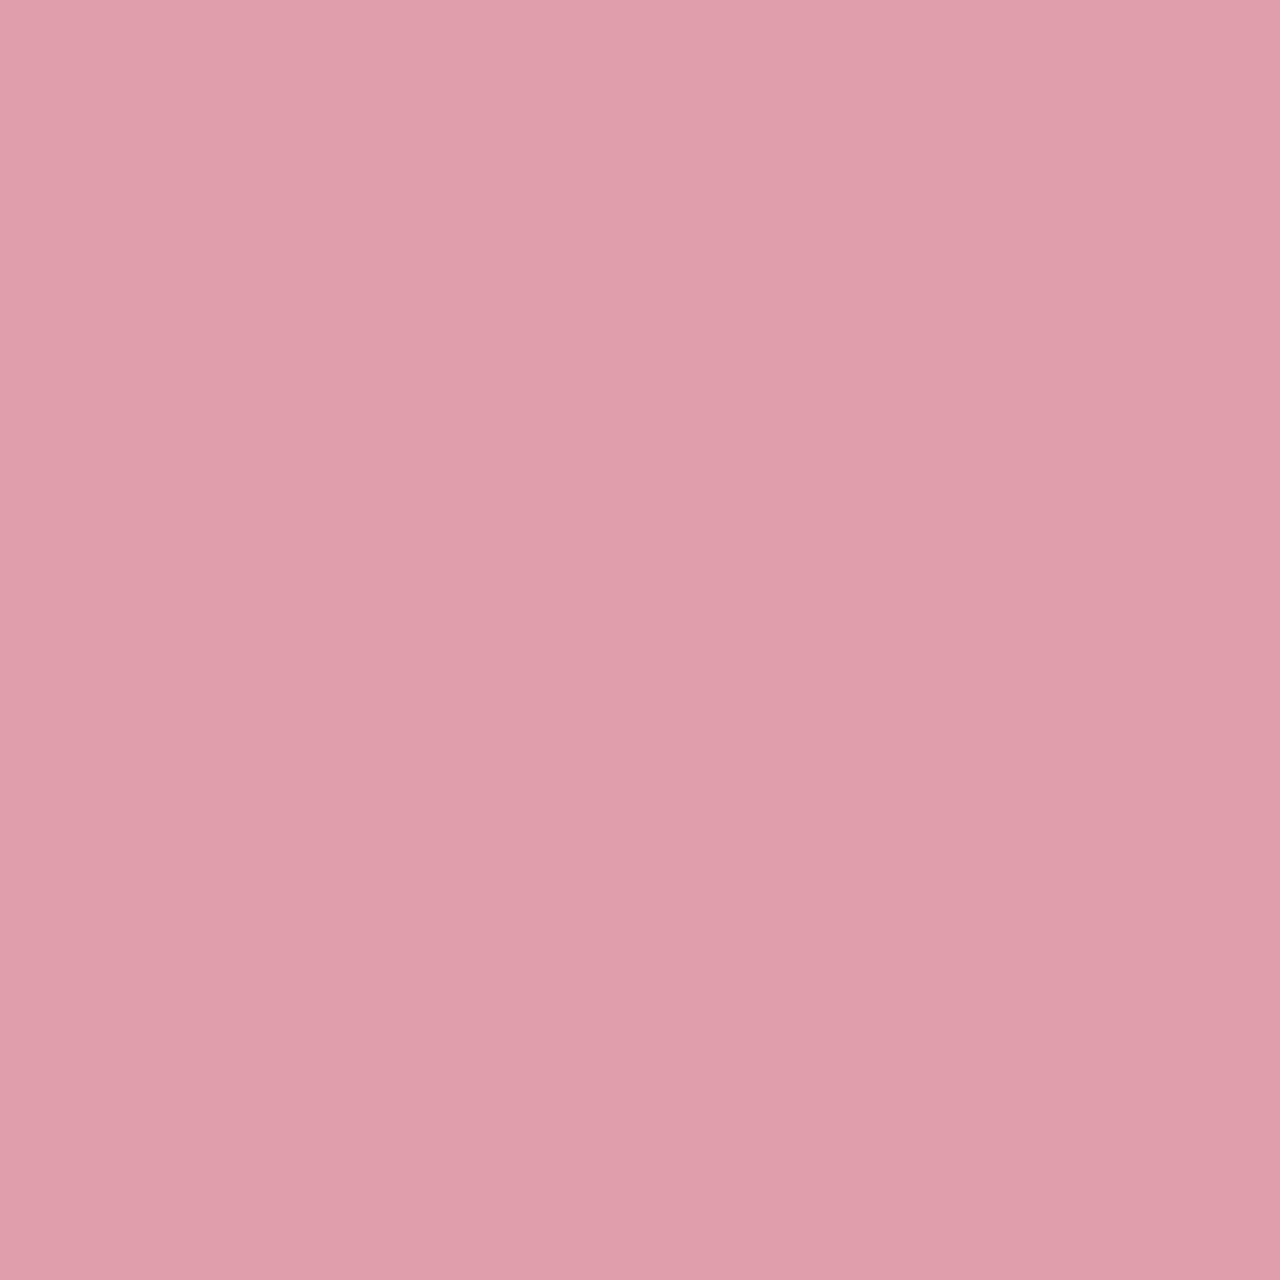 Dusty Pink 121-173 PBS Fabrics Painter's Palette Solids collection